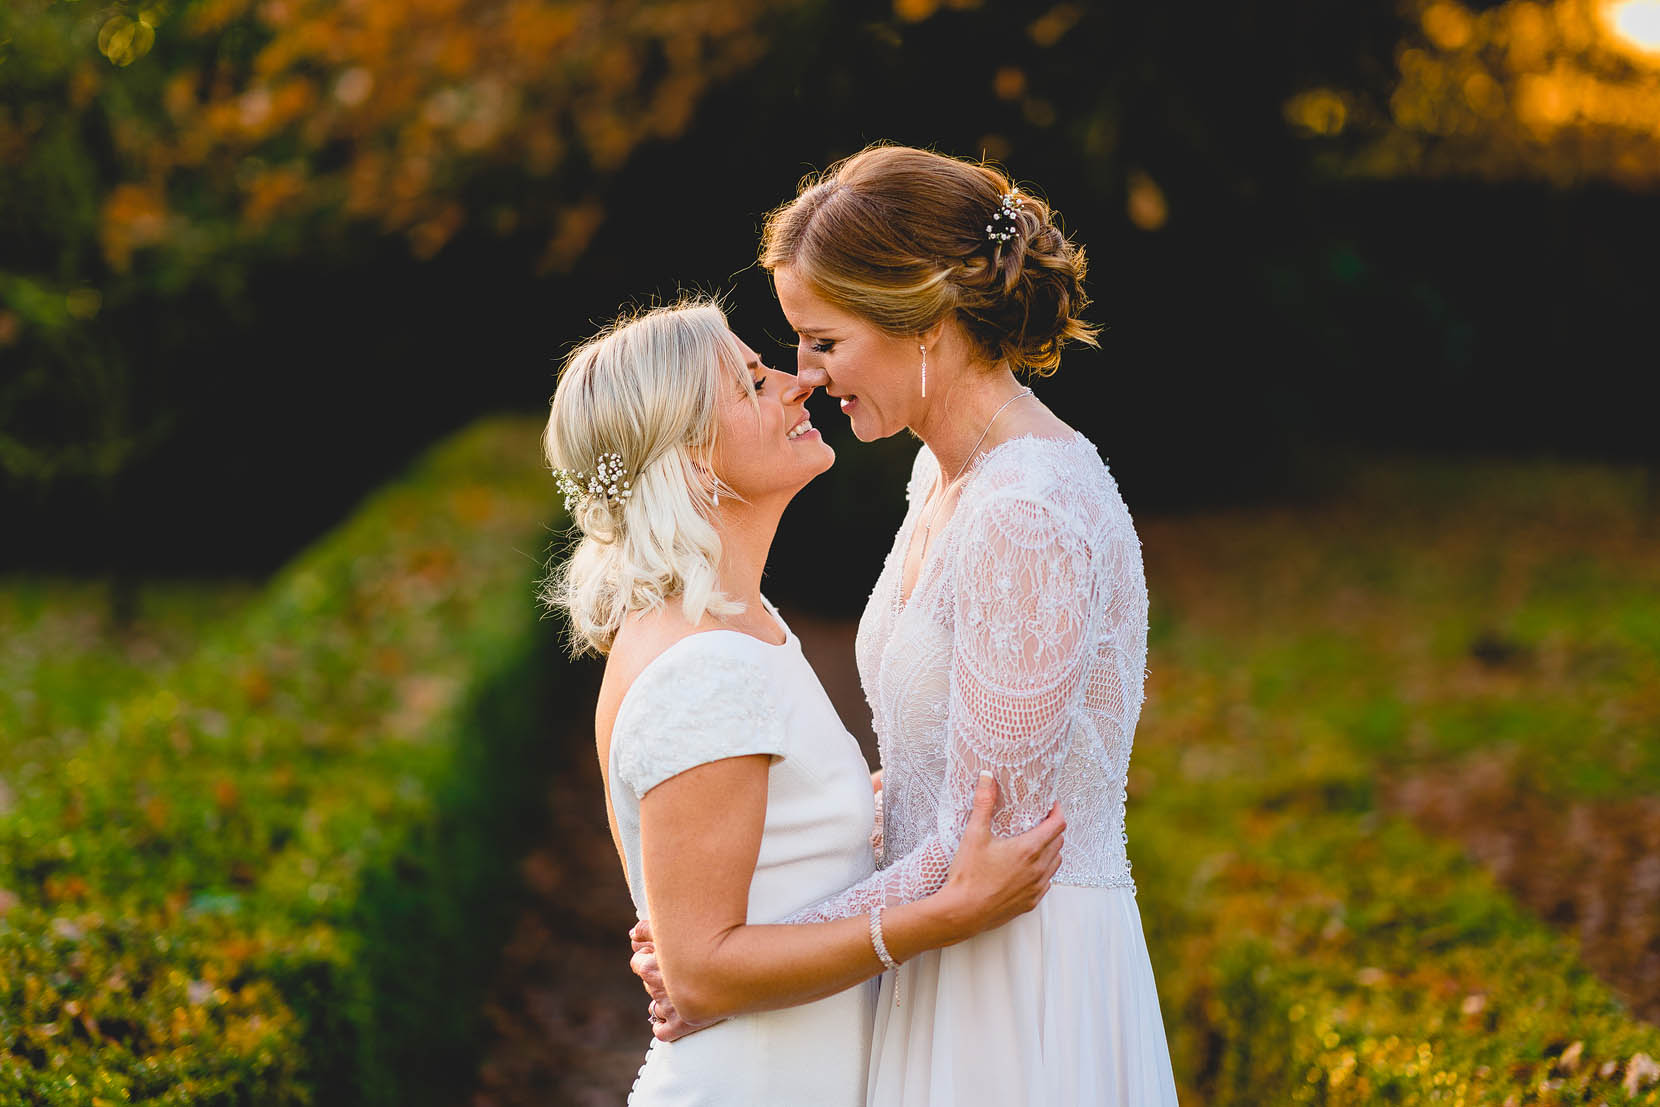 vaila and annica share a kiss at their same sex wedding at southwood hall in norfolk